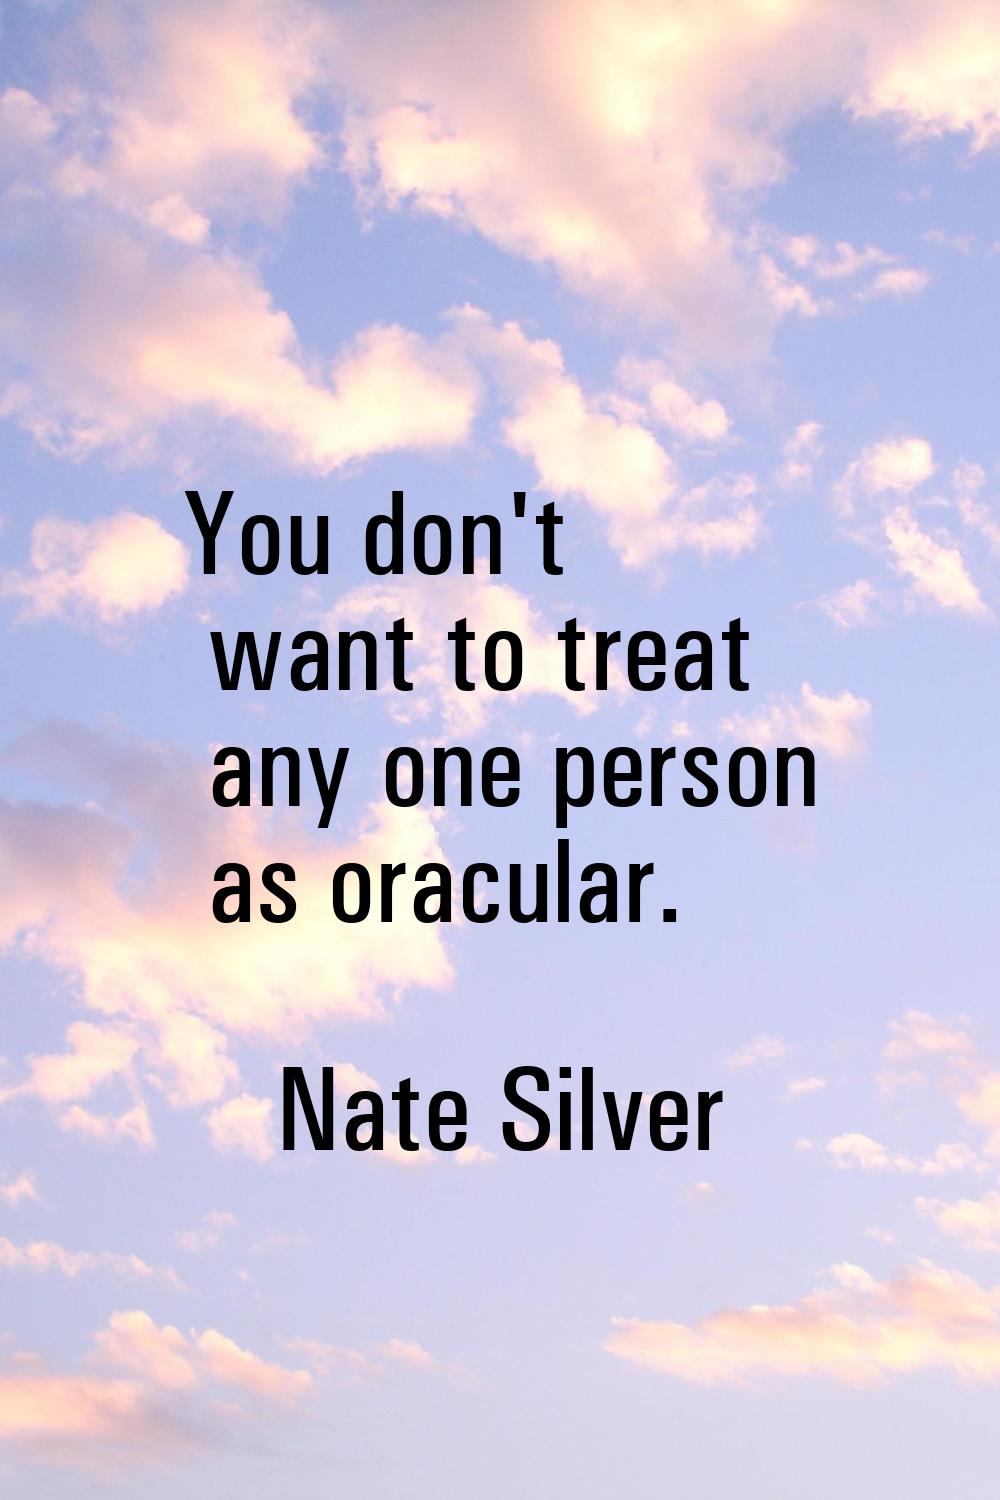 You don't want to treat any one person as oracular.